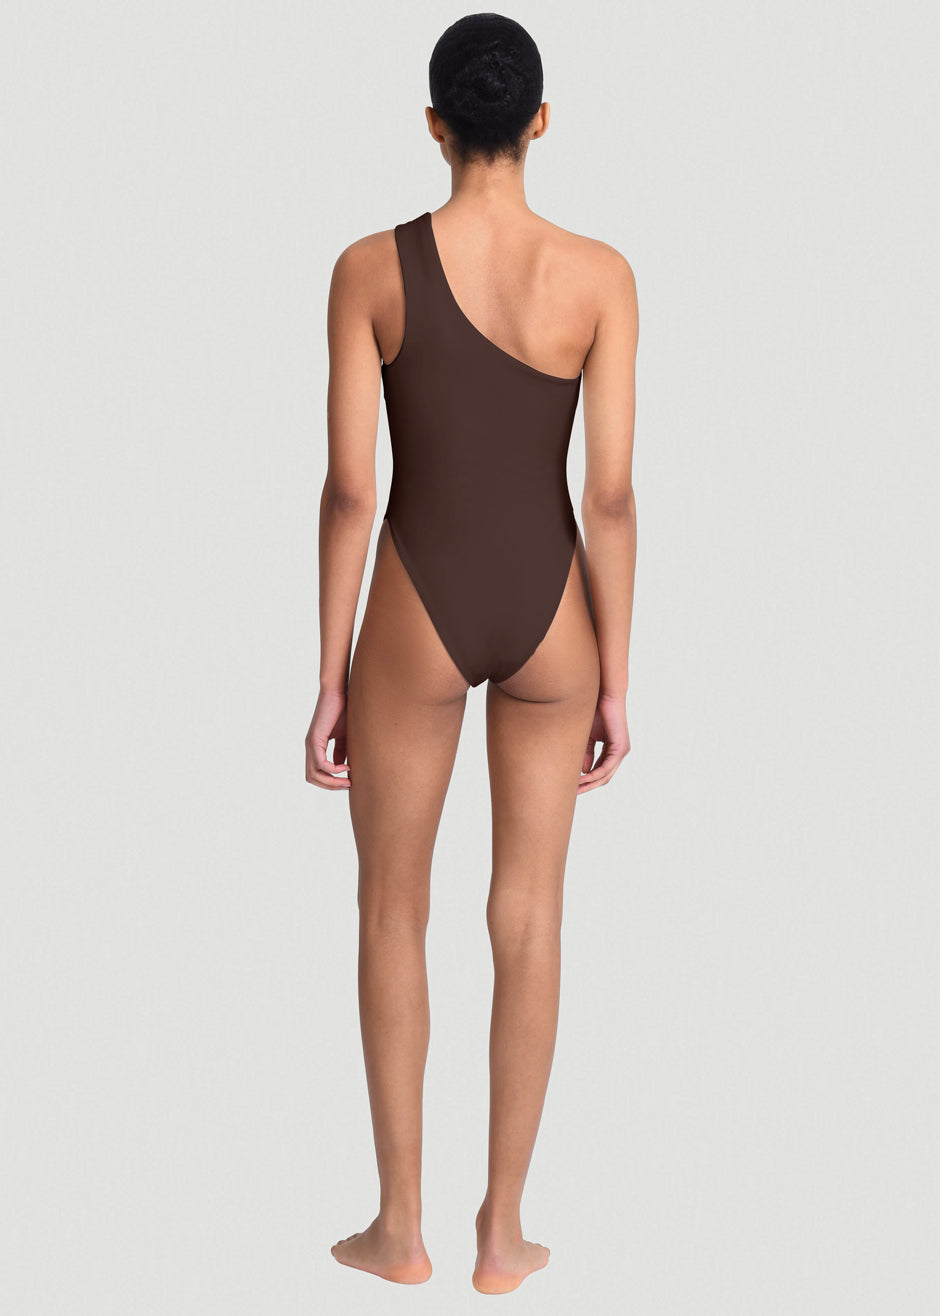 Aexae Knot One Piece Swimsuit - Brown